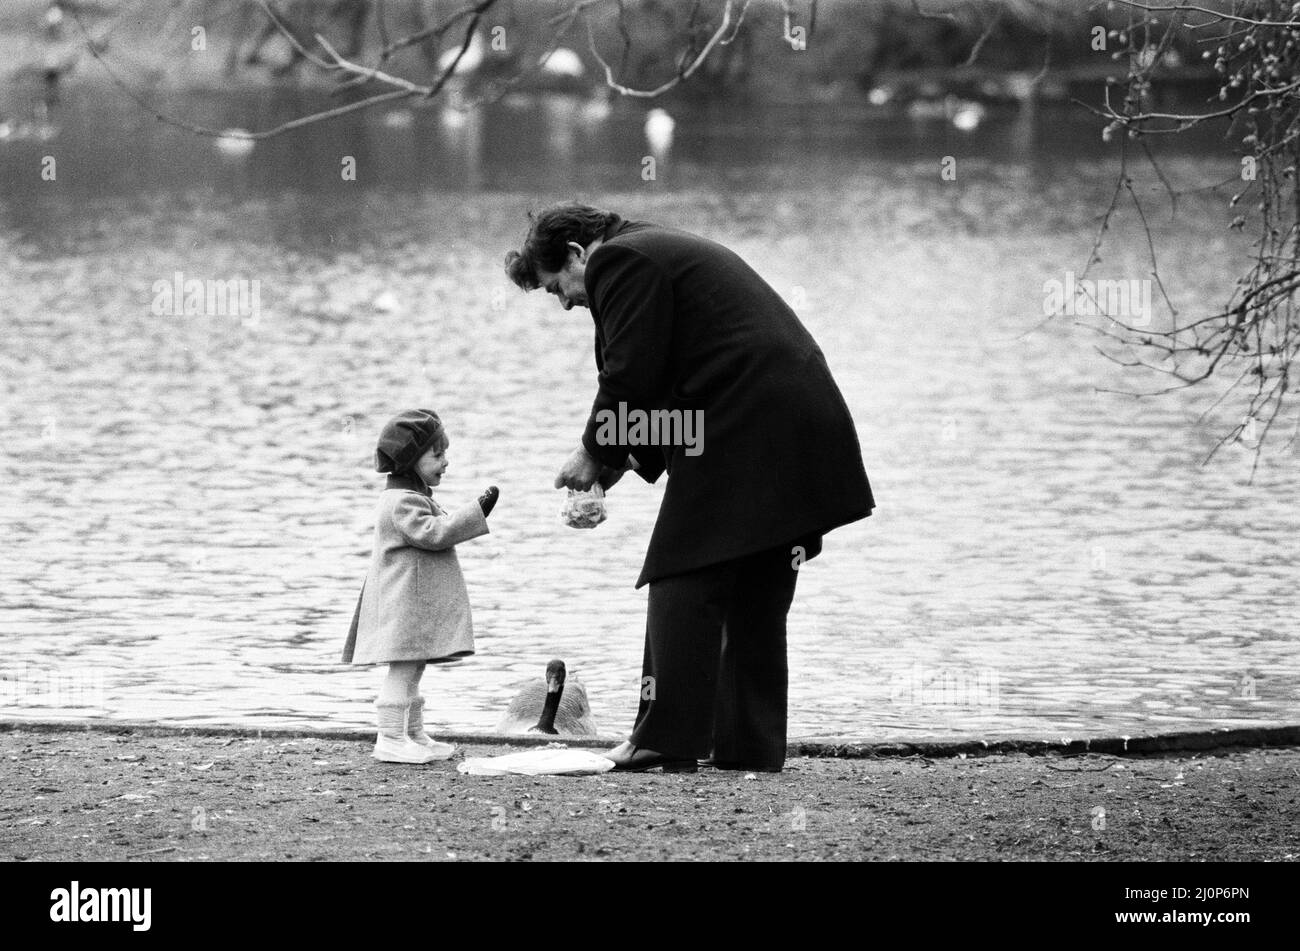 Chancellor of the Exchequer Nigel Lawson enjoys a pre-Budget walk with his family in St James's Park, London. He is pictured with his daughter Emily. 13th March 1984. Stock Photo